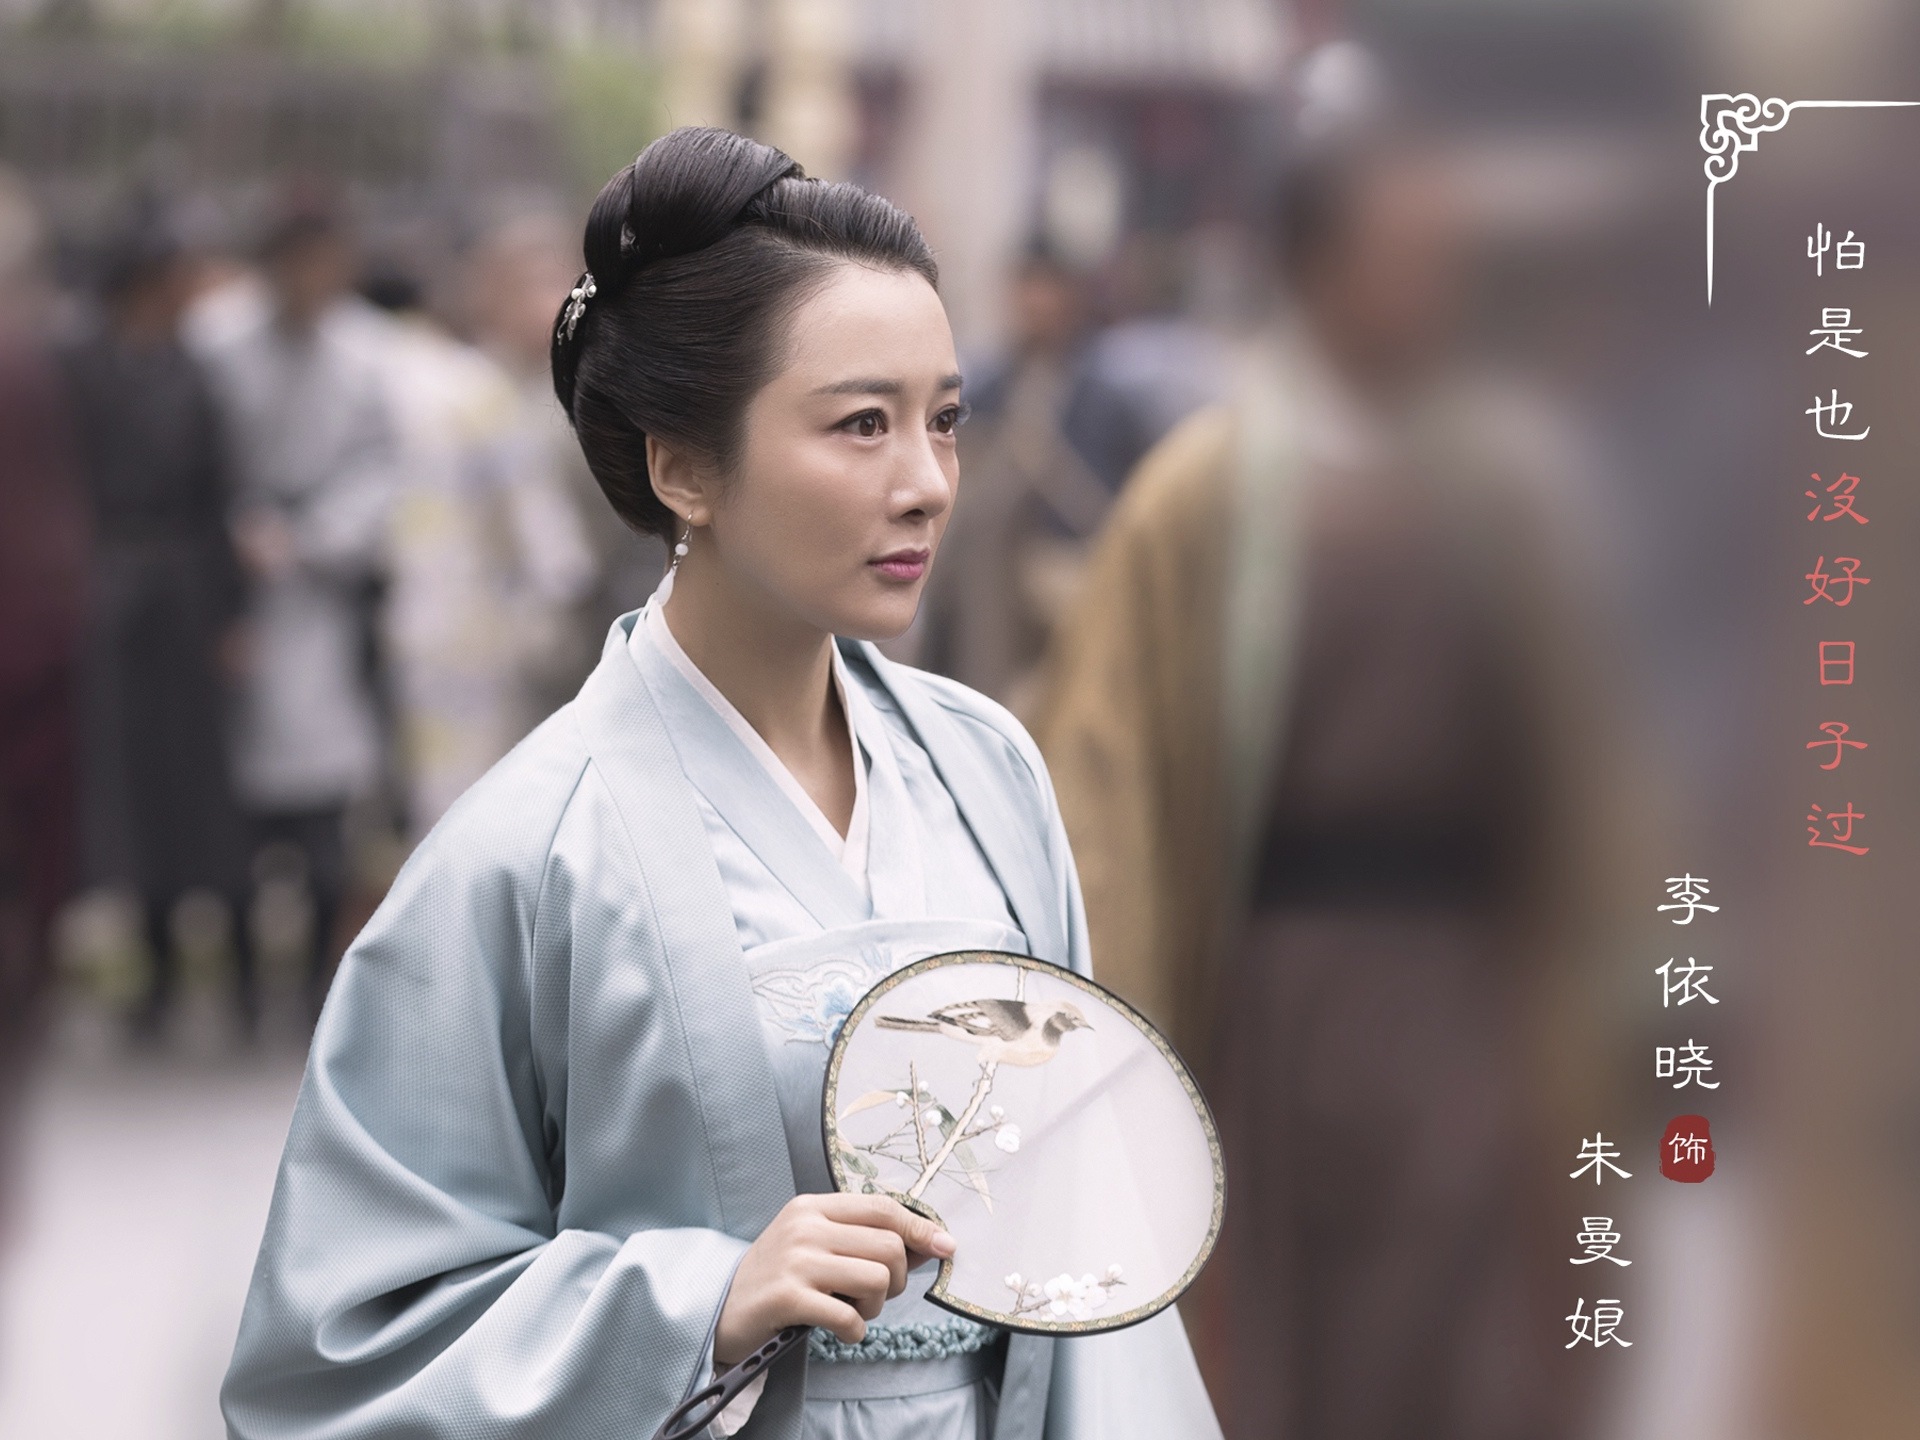 The Story Of MingLan, TV series HD wallpapers #34 - 1920x1440